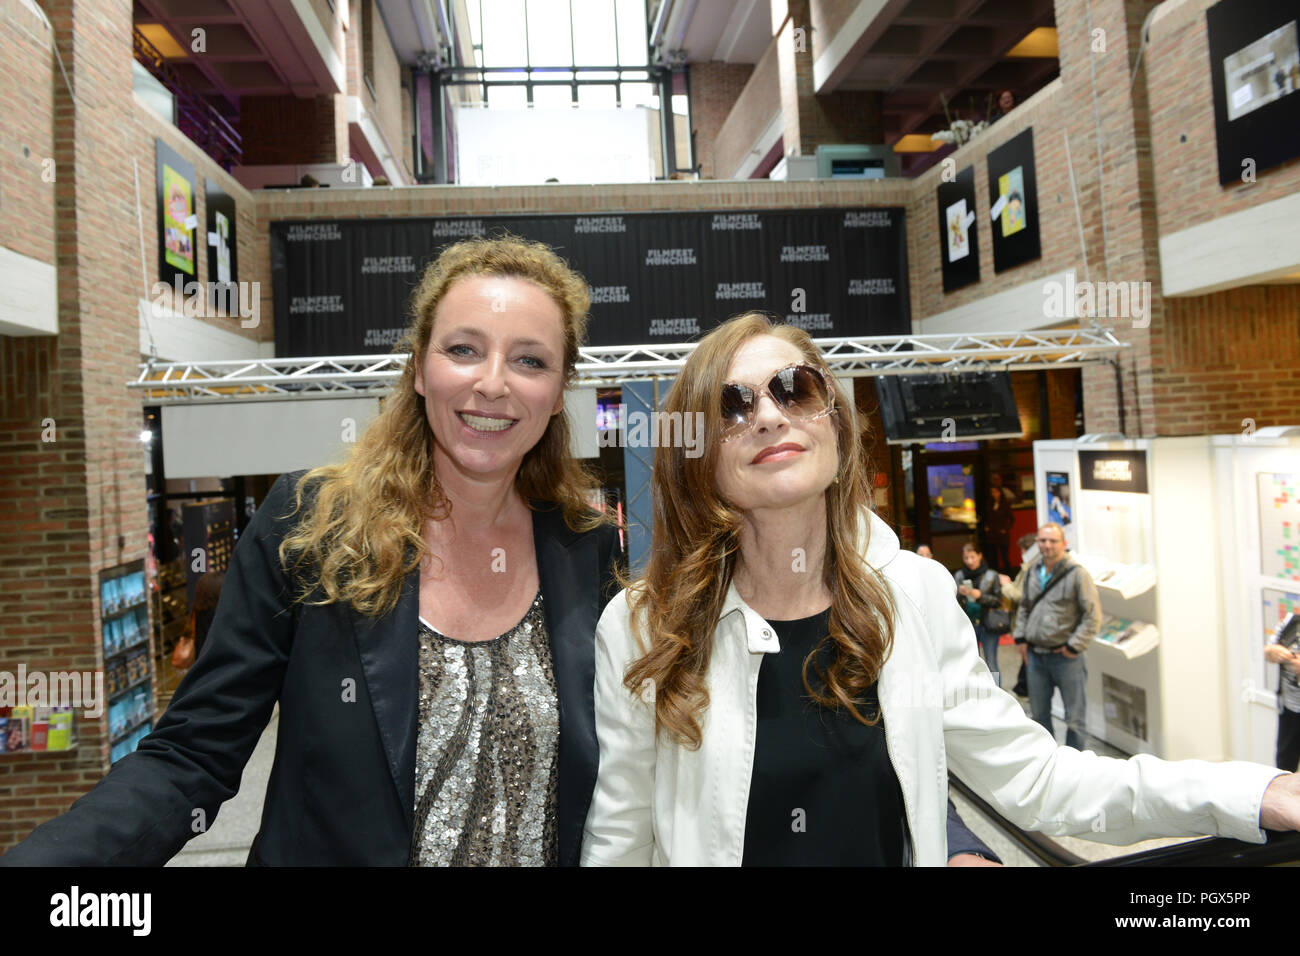 Actress Isabelle Huppert arrives at Filmfest München 2014 with festival director Diana Iljine Stock Photo